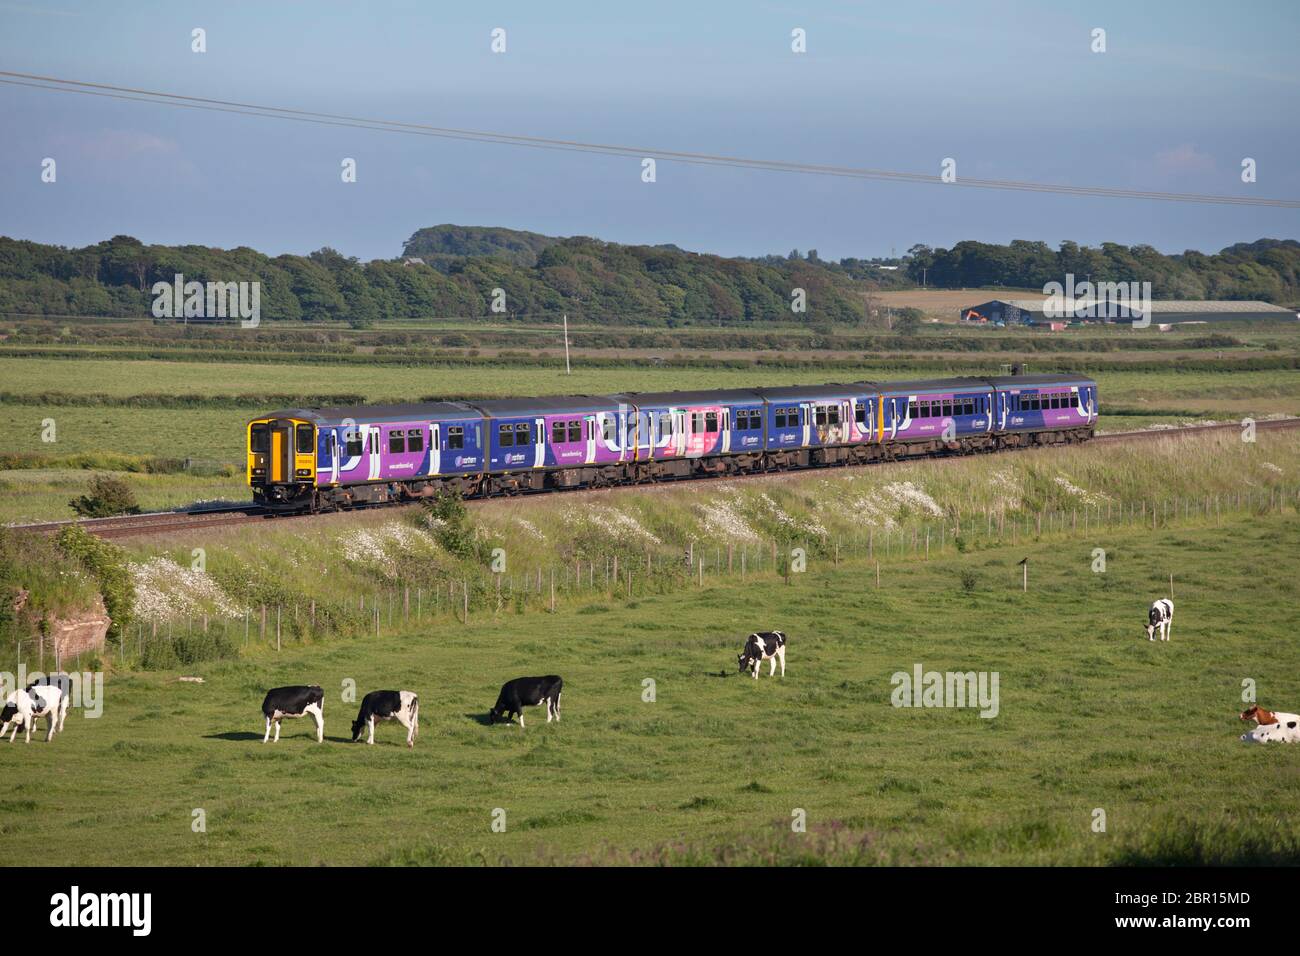 3 Northern rail sprinter trains forming a Manchester to Blackpool evening commuter train on the line to Blackpool Stock Photo